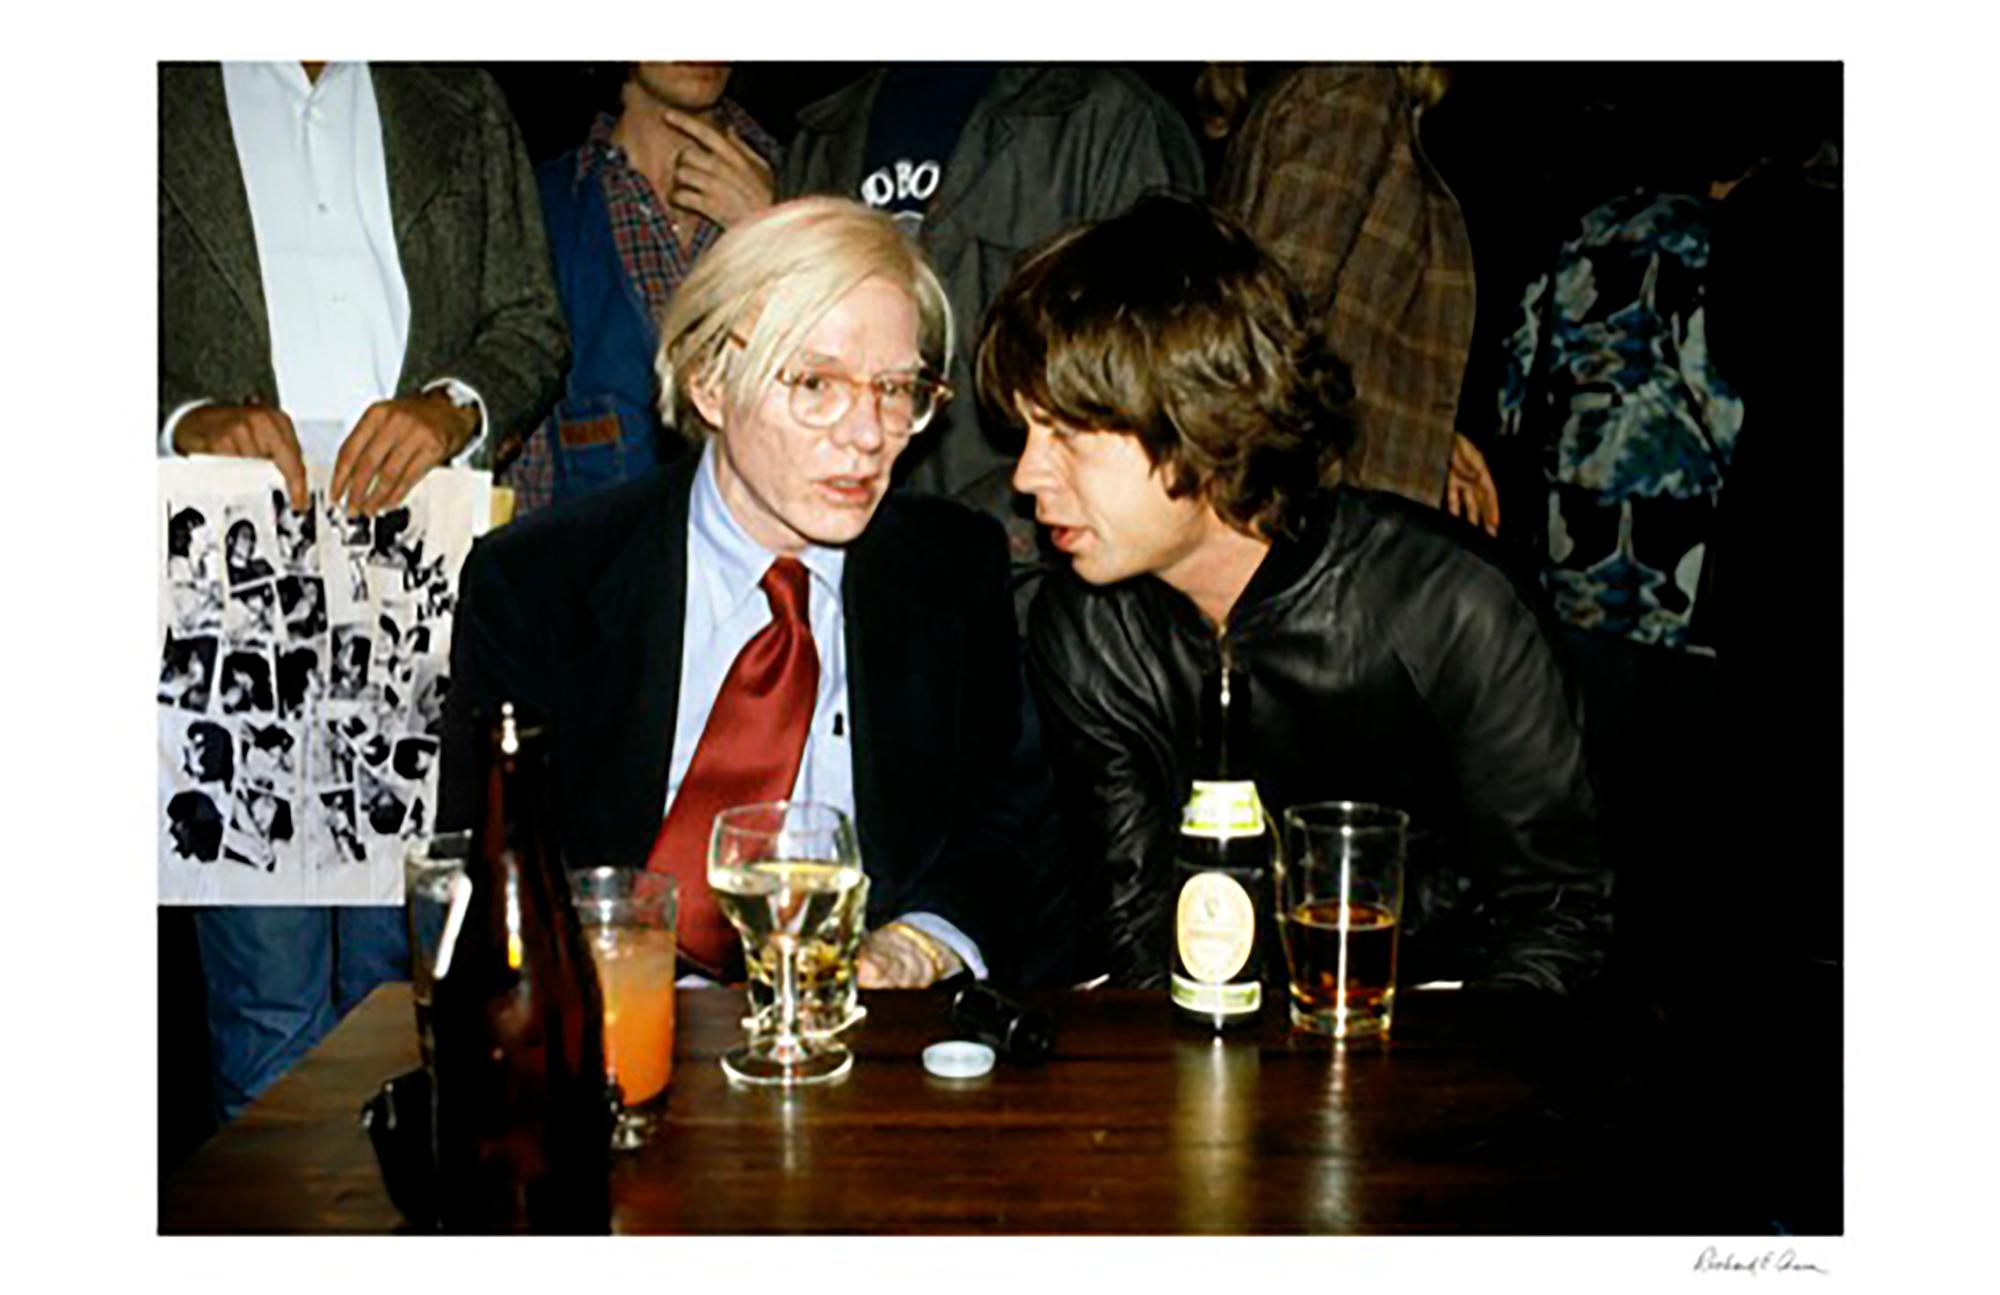 Richard E. Aaron Color Photograph - Andy Warhol and Mick Jagger in Color